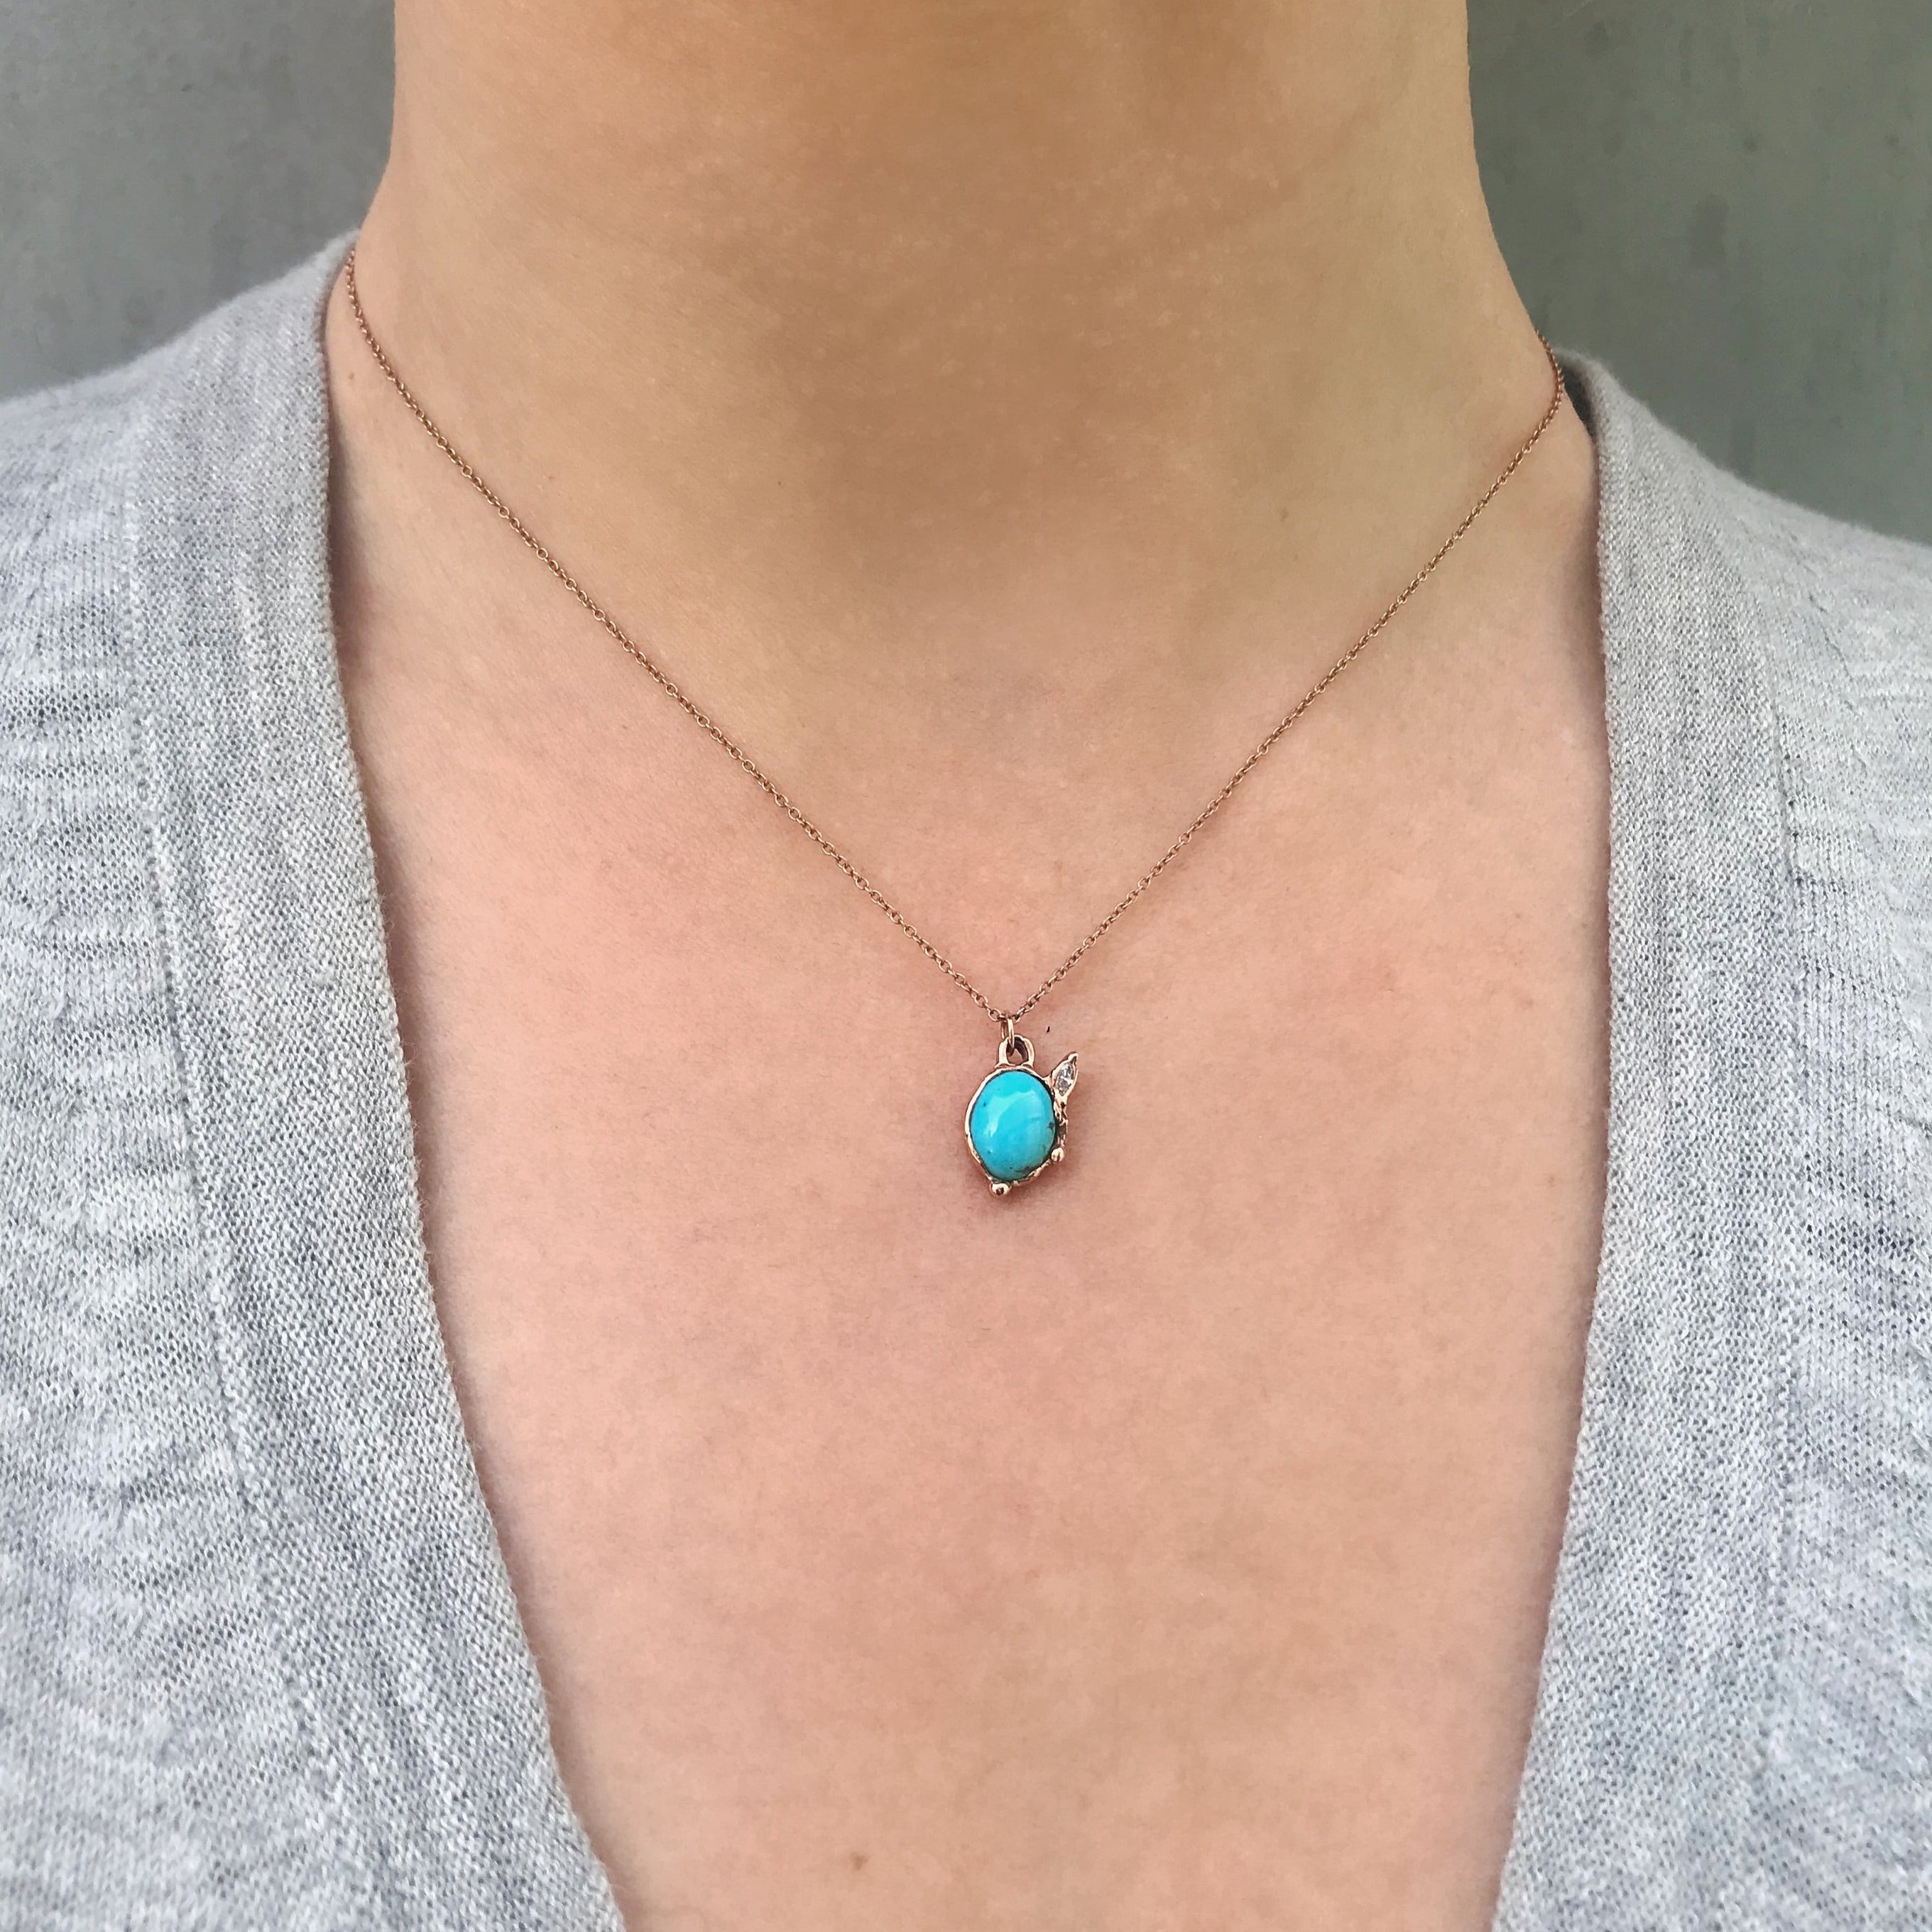 Oval Turquoise and Diamond Necklace, Rose Gold Pendant Jaine K Designs   